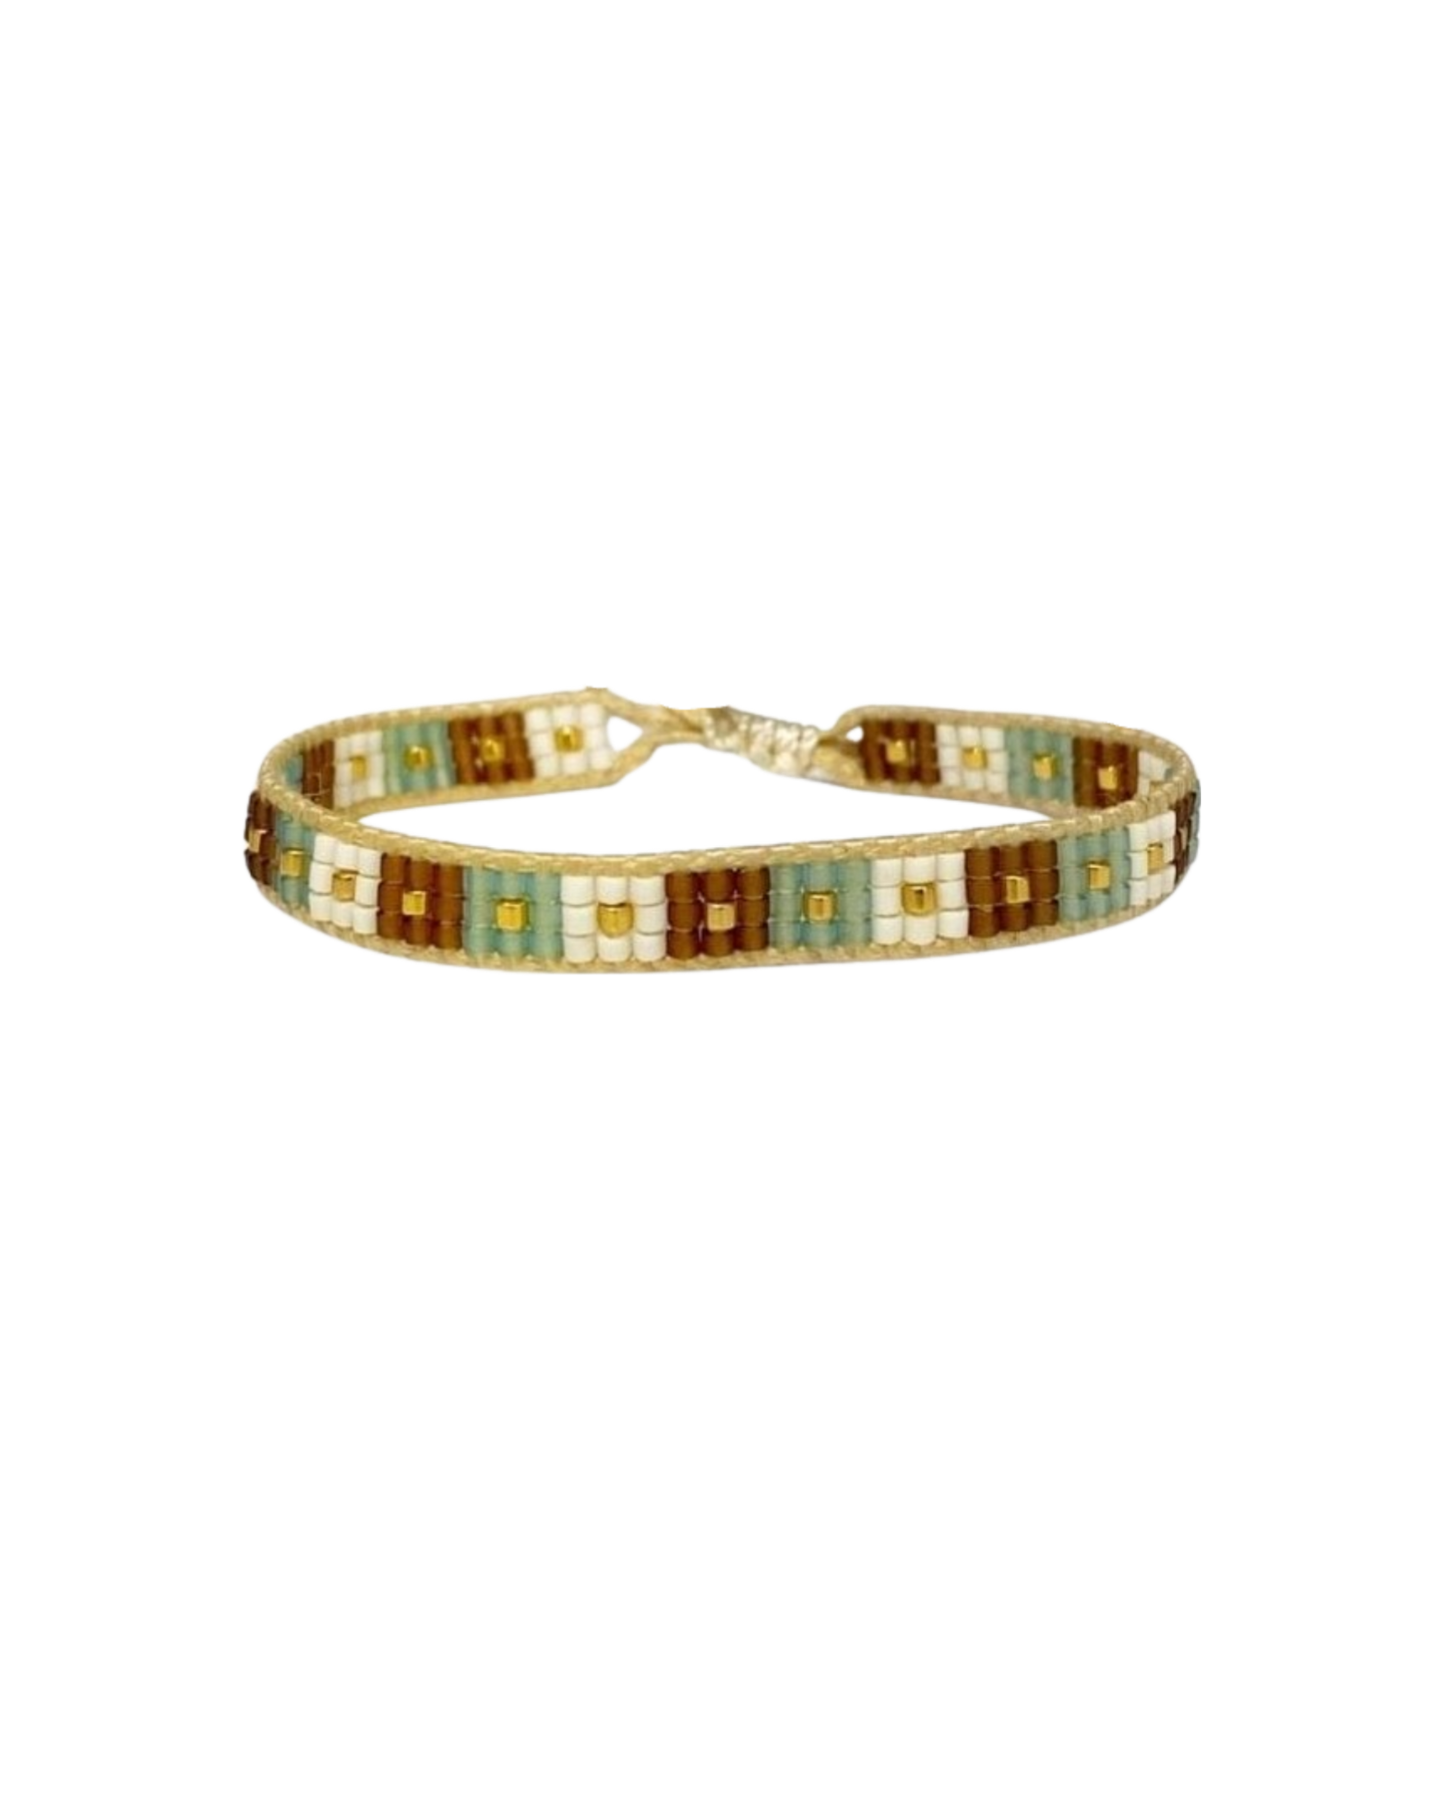 beaded-bracelet with checkered design in green tones